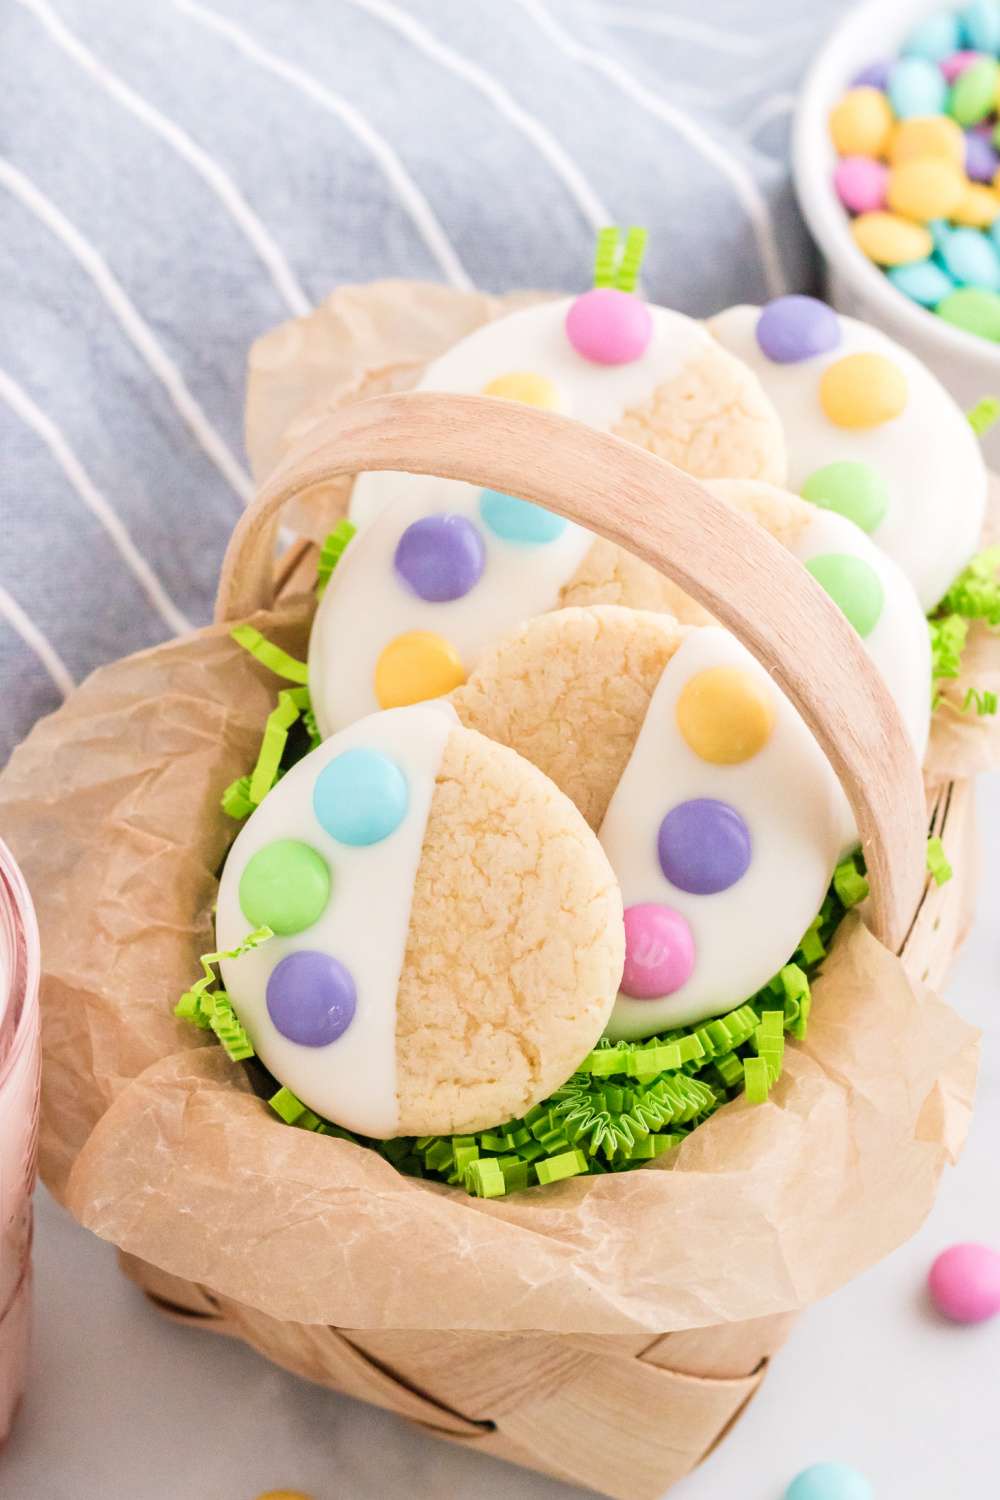 Get ready for Easter by whipping up a batch or two of these super adorable and extremely scrumptious Easter Cake Mix Cookies! via @familyfresh